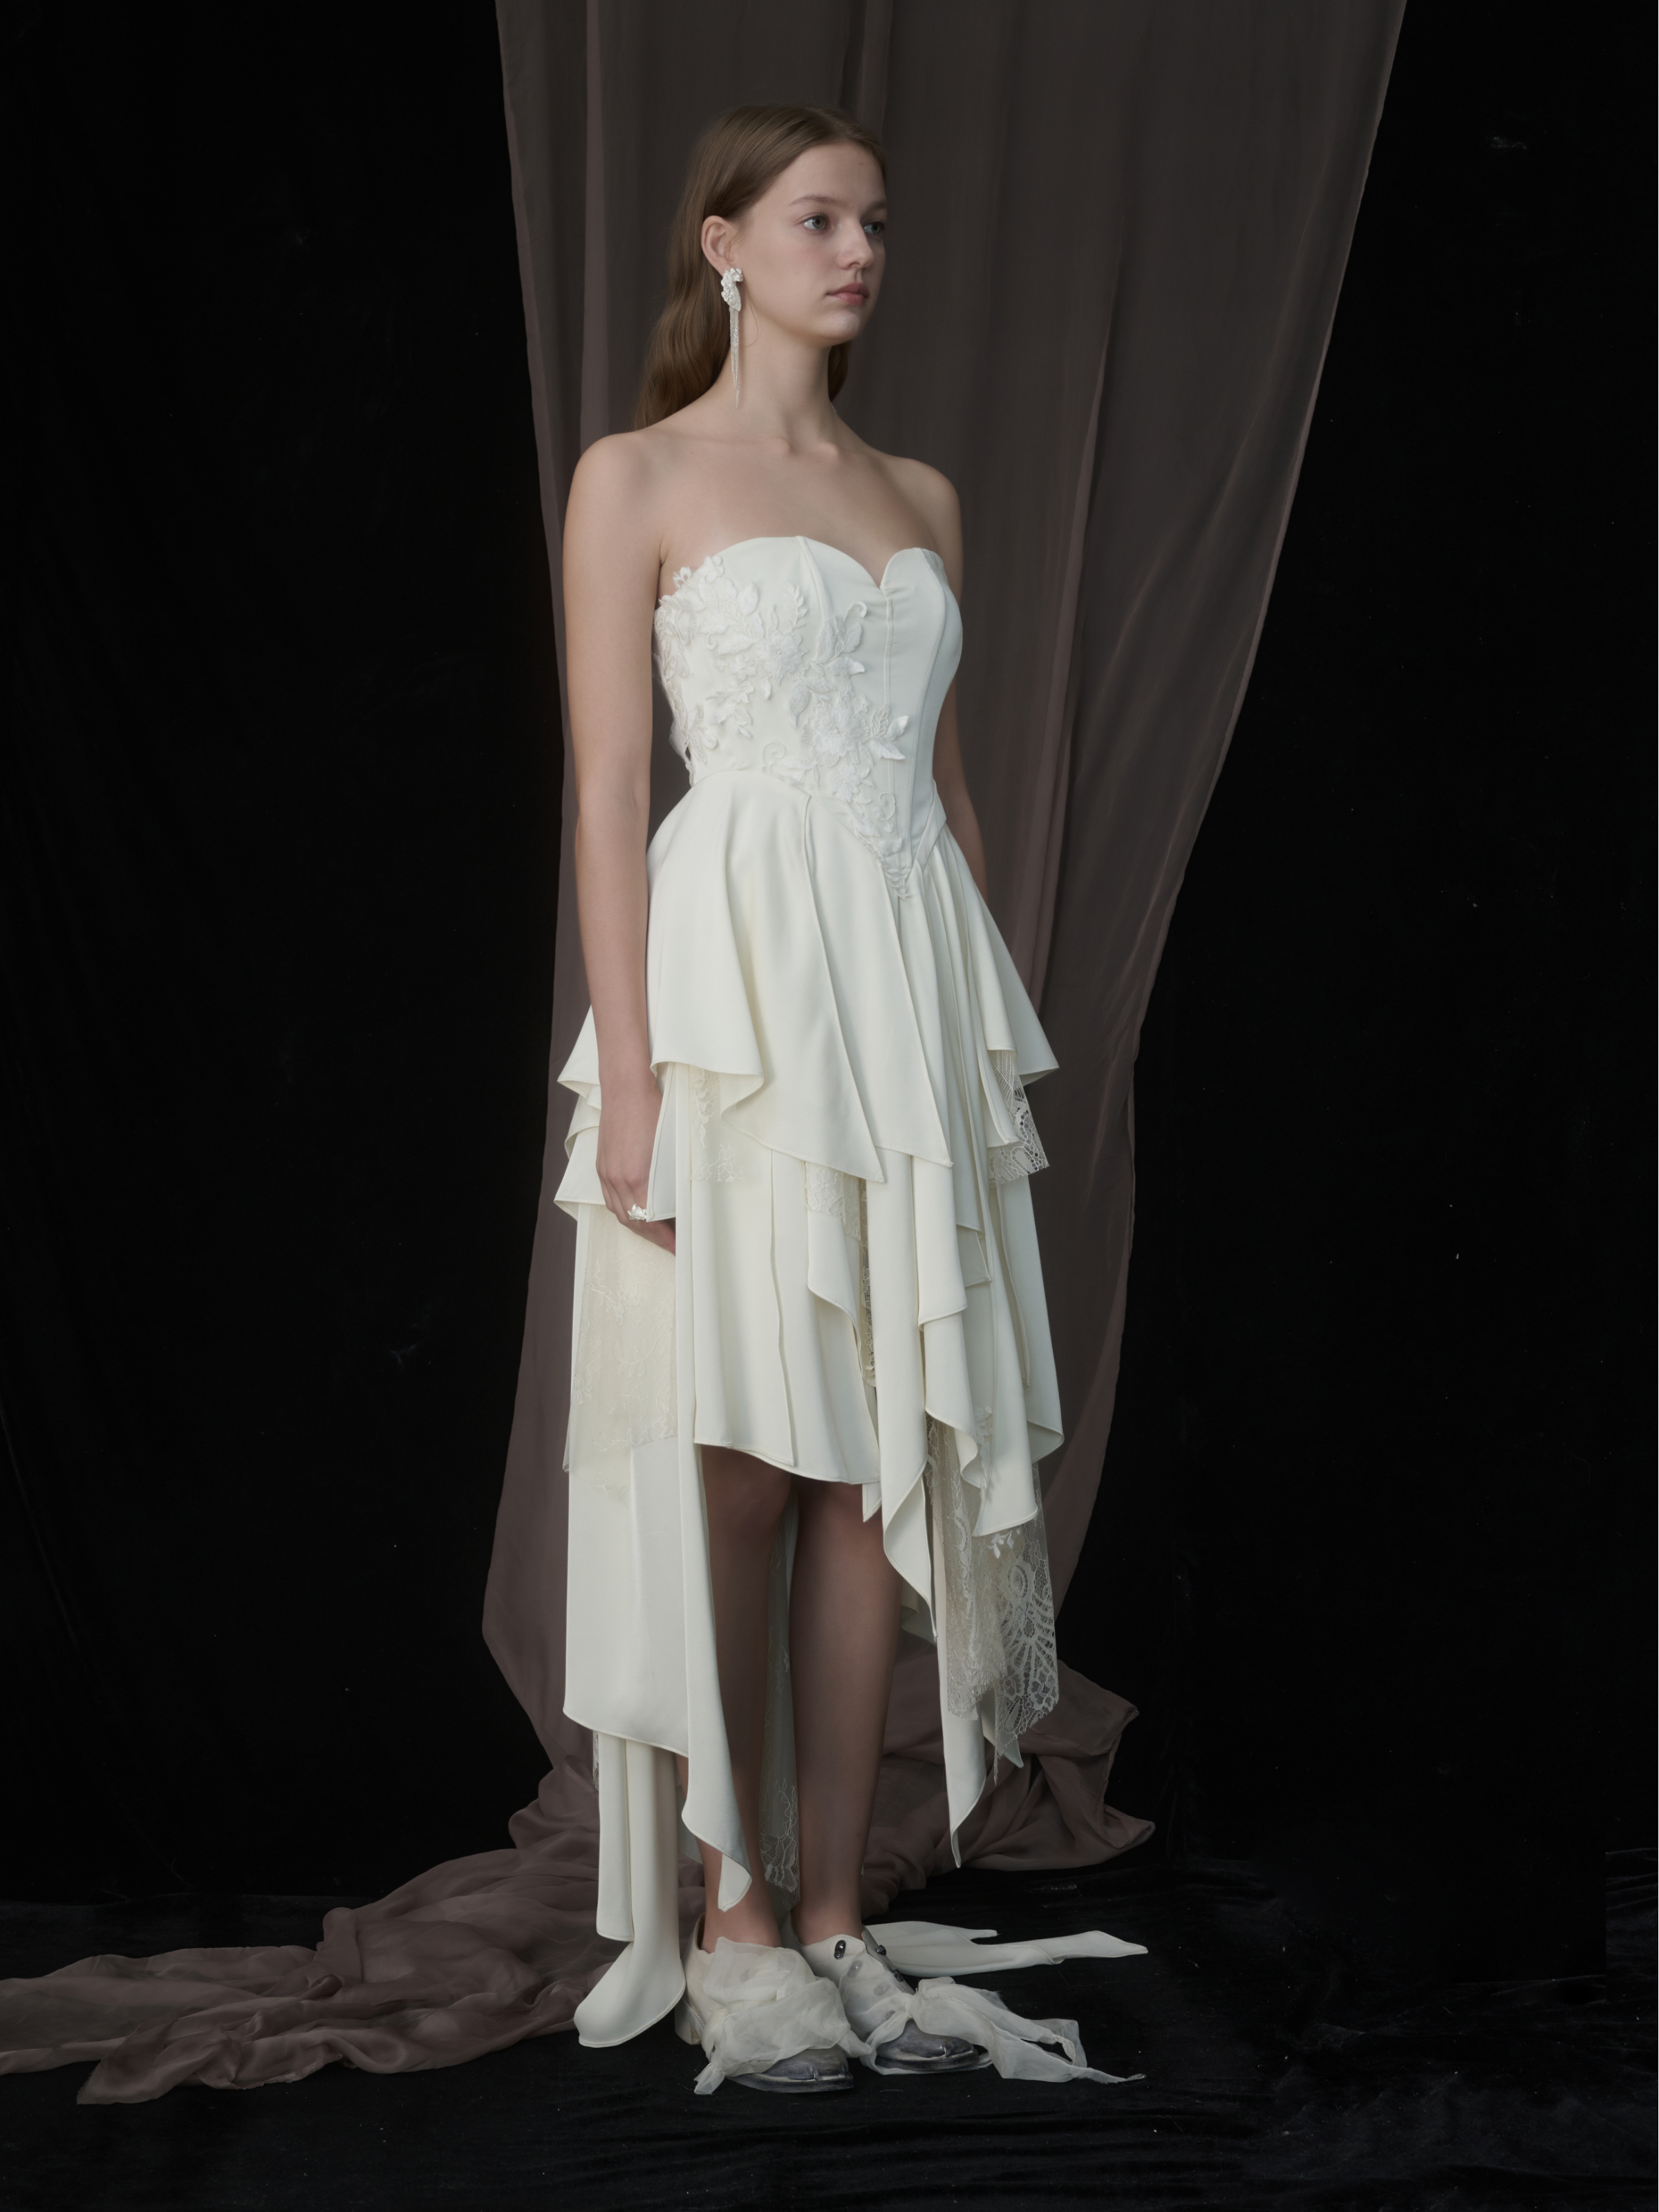 White Asymmeteric Pleated Off-Shoulder Dress